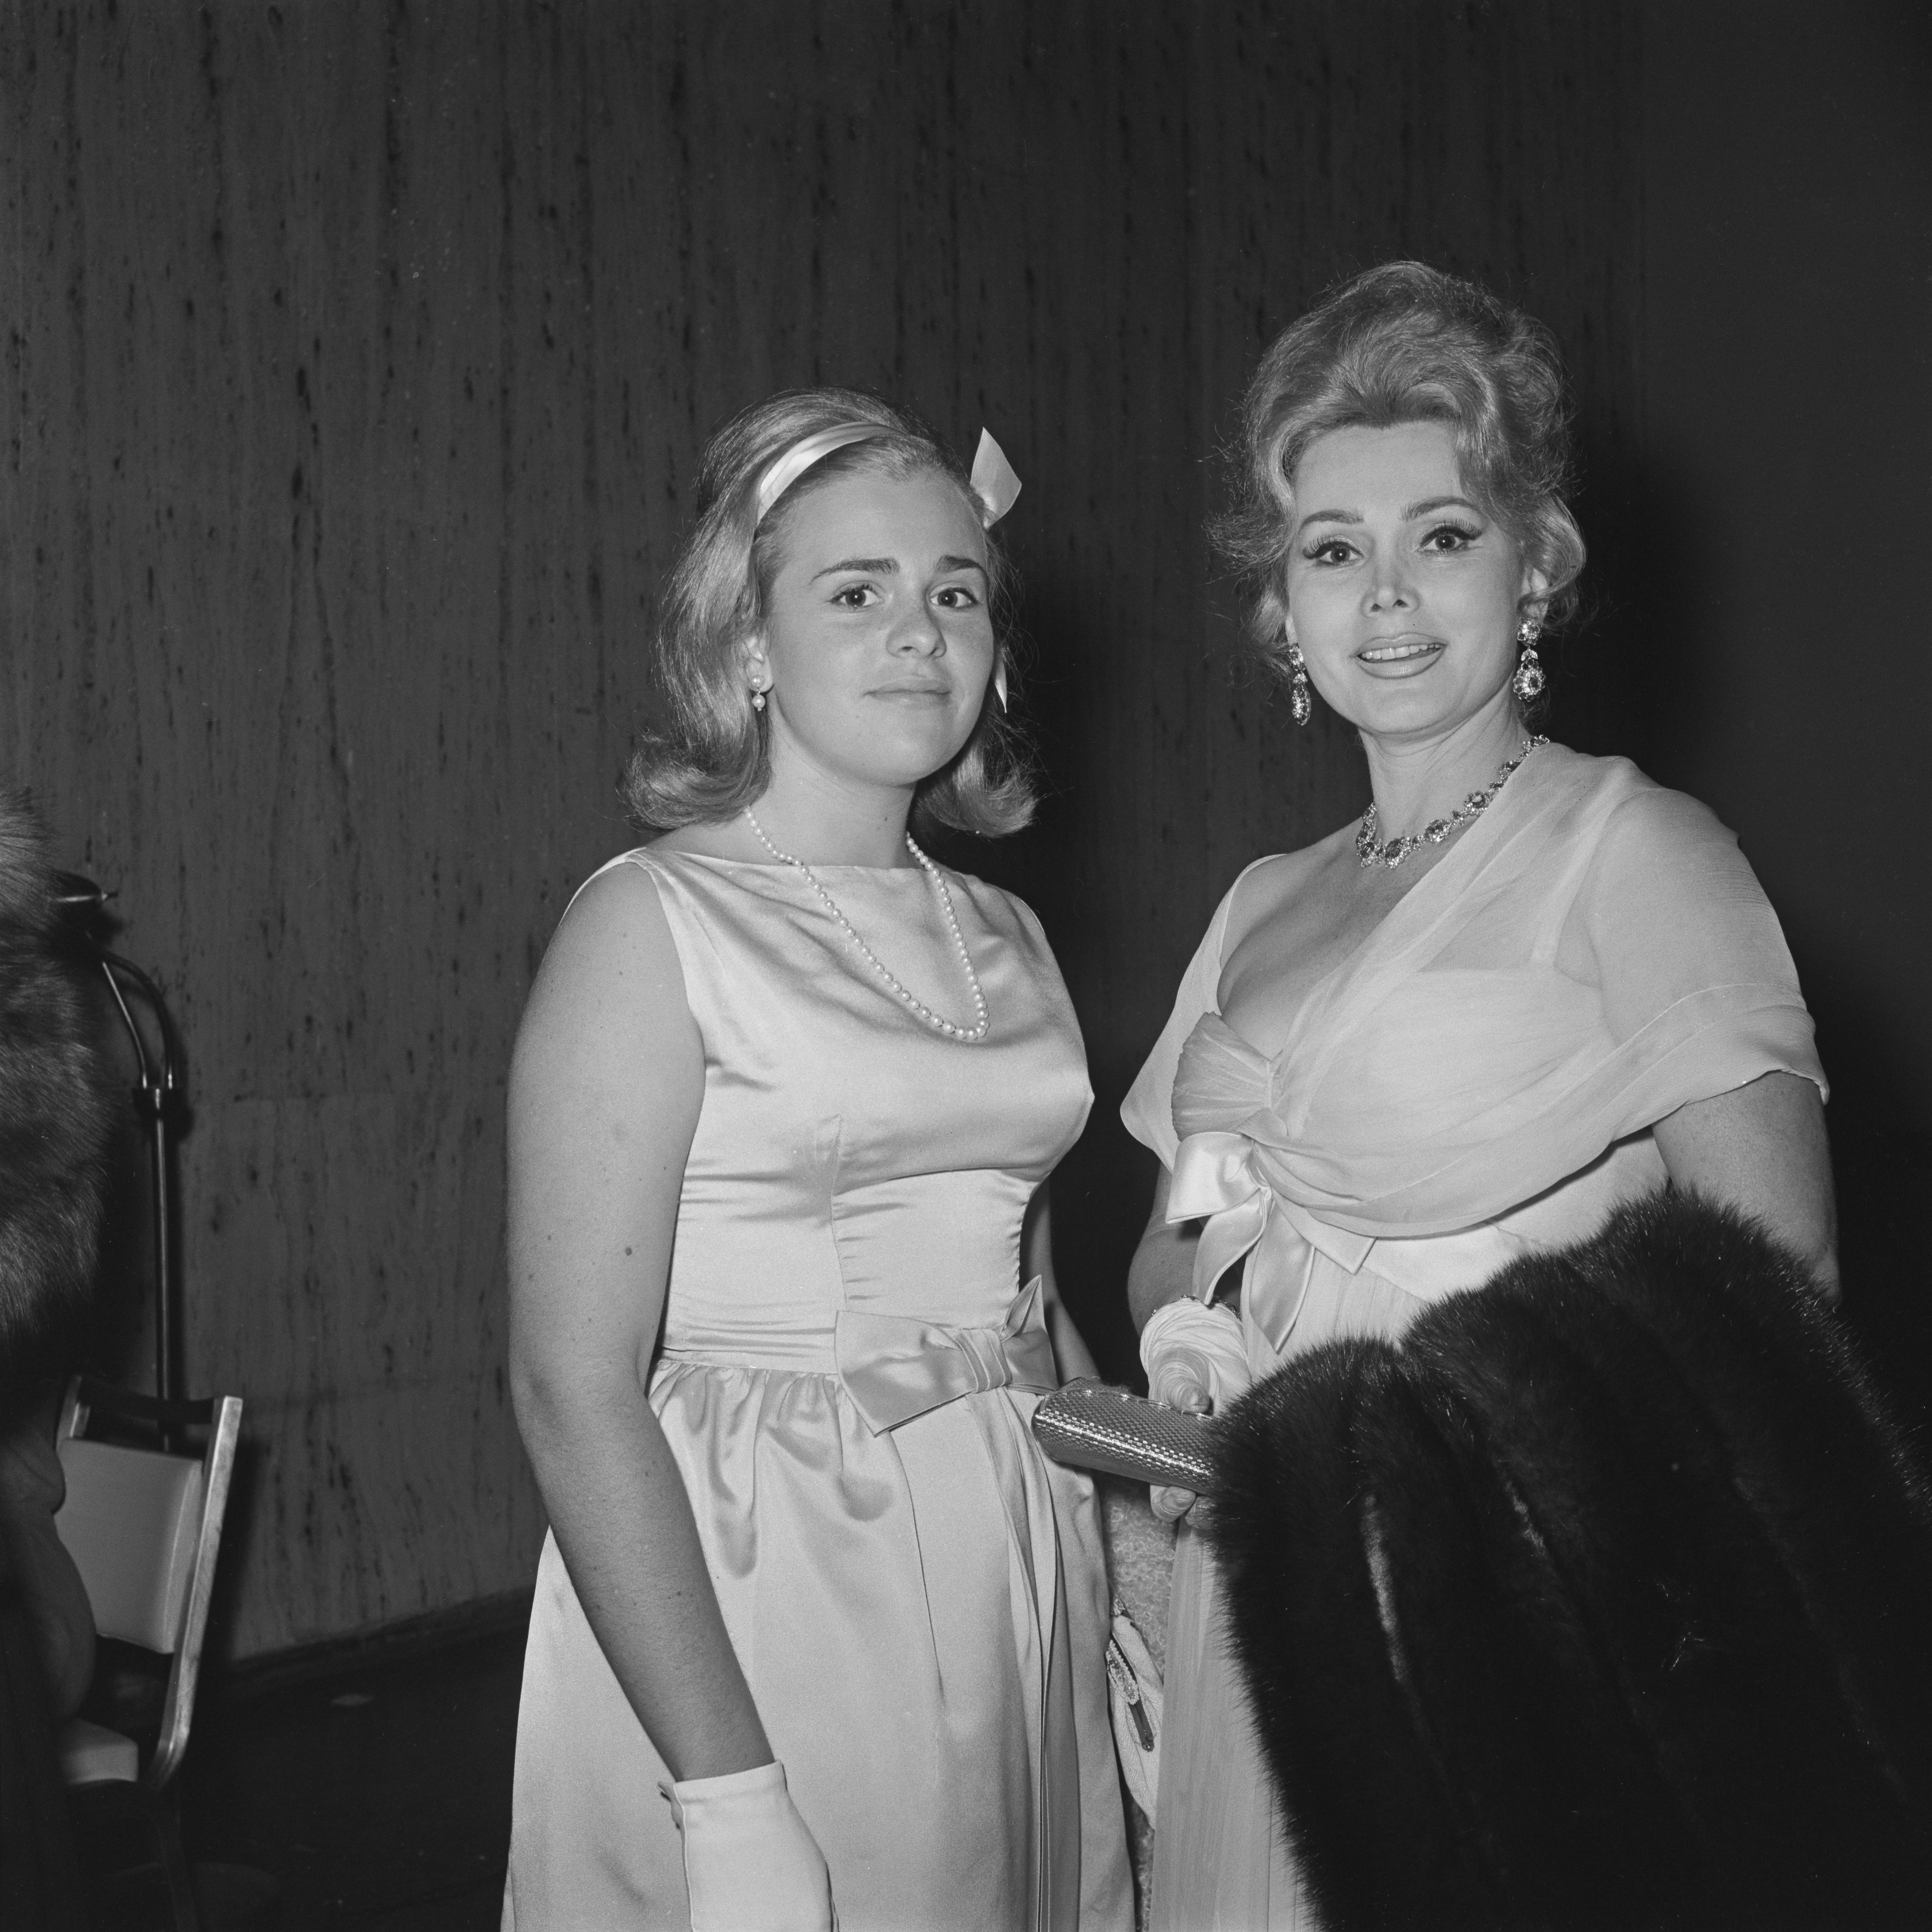 Francesca Hilton and Zsa Zsa Gabor at the Hope Dinner, circa 1963. | Source: Archive Photos/Getty Images